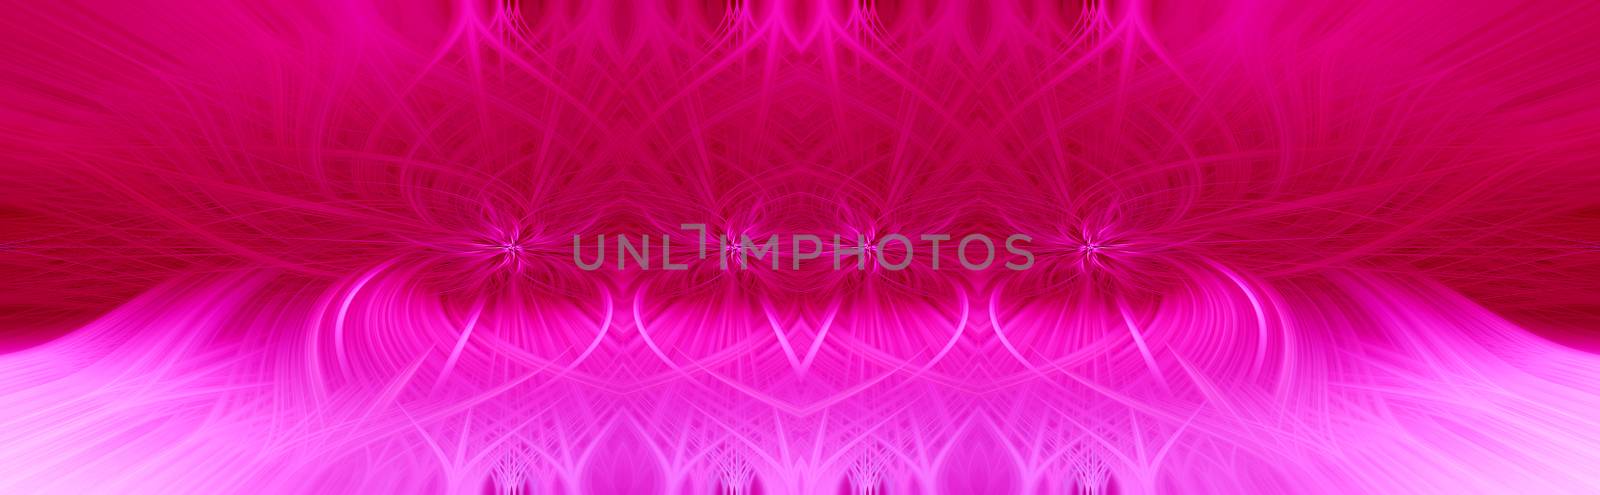 Beautiful abstract intertwined symmetrical 3d fibers forming a shape of sparkle, flame, flower, interlinked hearts. Pink, maroon, and purple colors. Illustration. Banner and panorama size